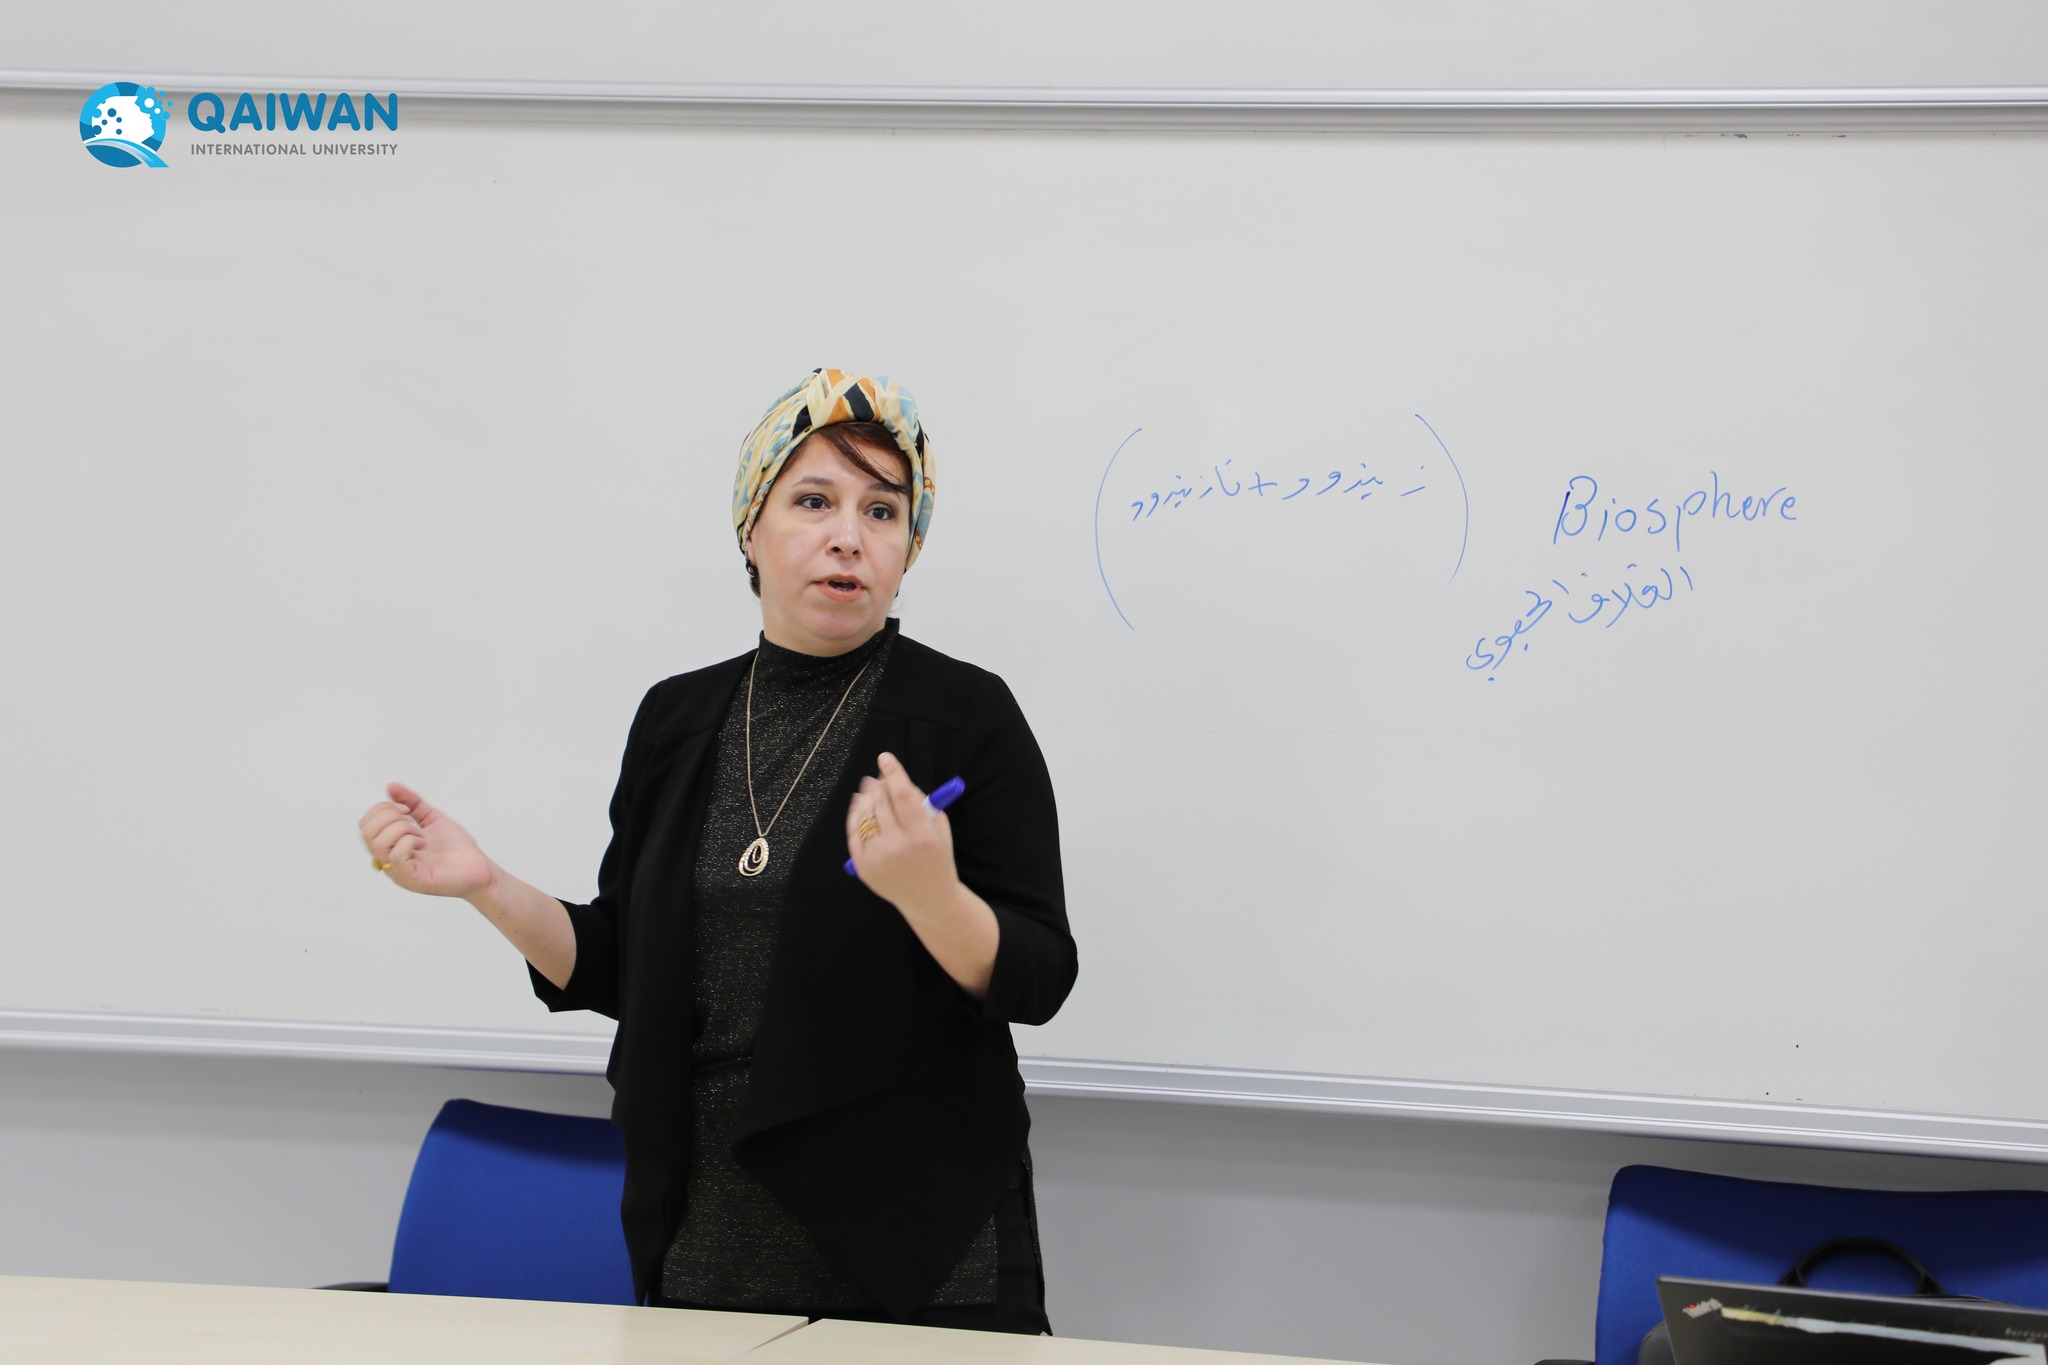 Dr. Rozhan Faraidoon expert in environmental studies, delivered a seminar to students at QIU